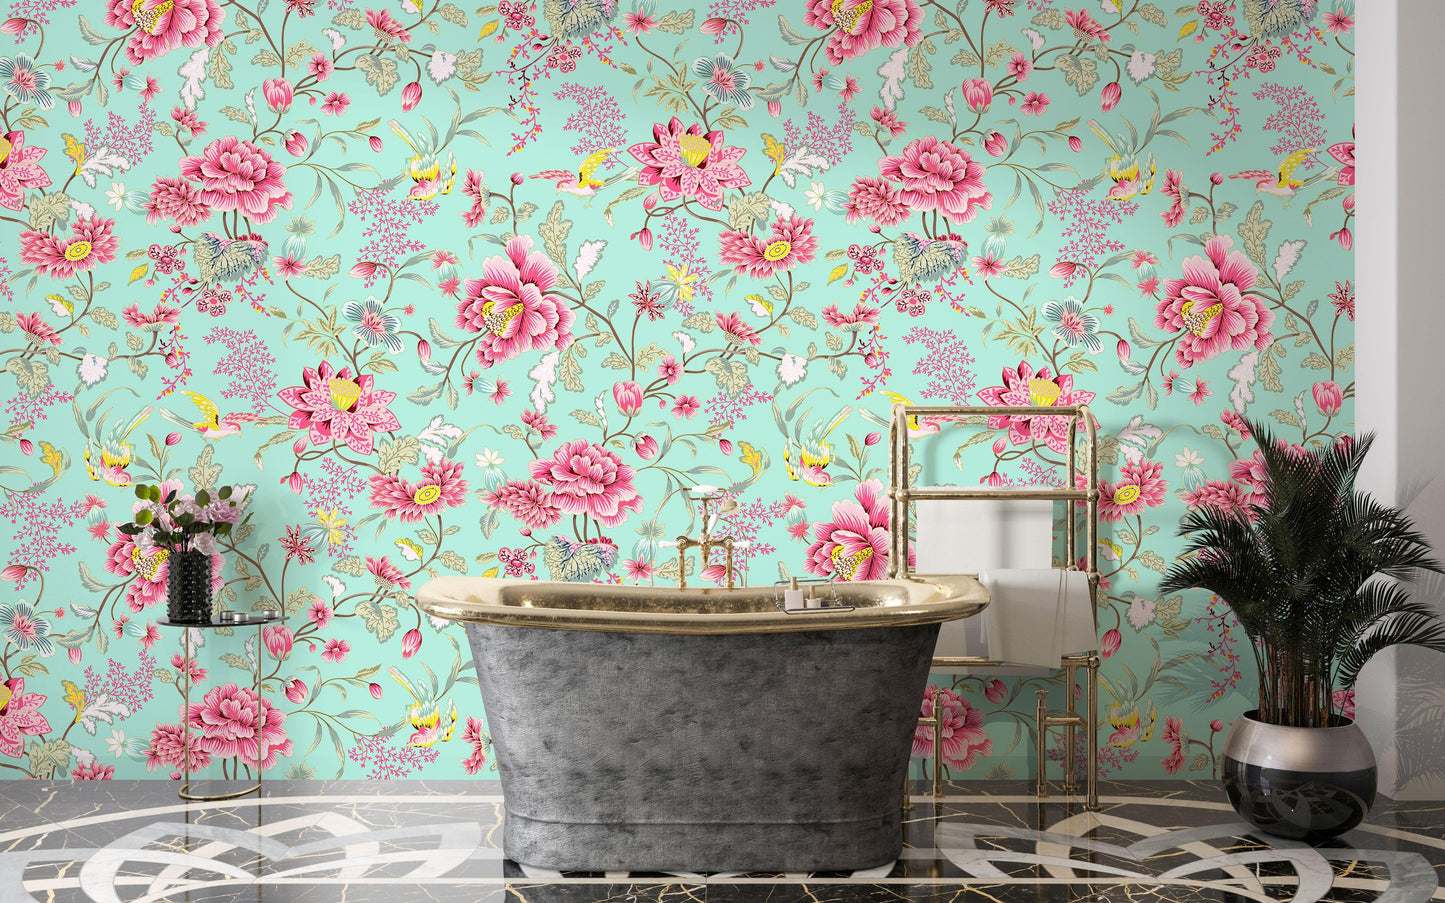 Mint Color Flower Pattern Wall Mural. Tropical Botanical Floral Peel and Stick Wallpaper. #6387